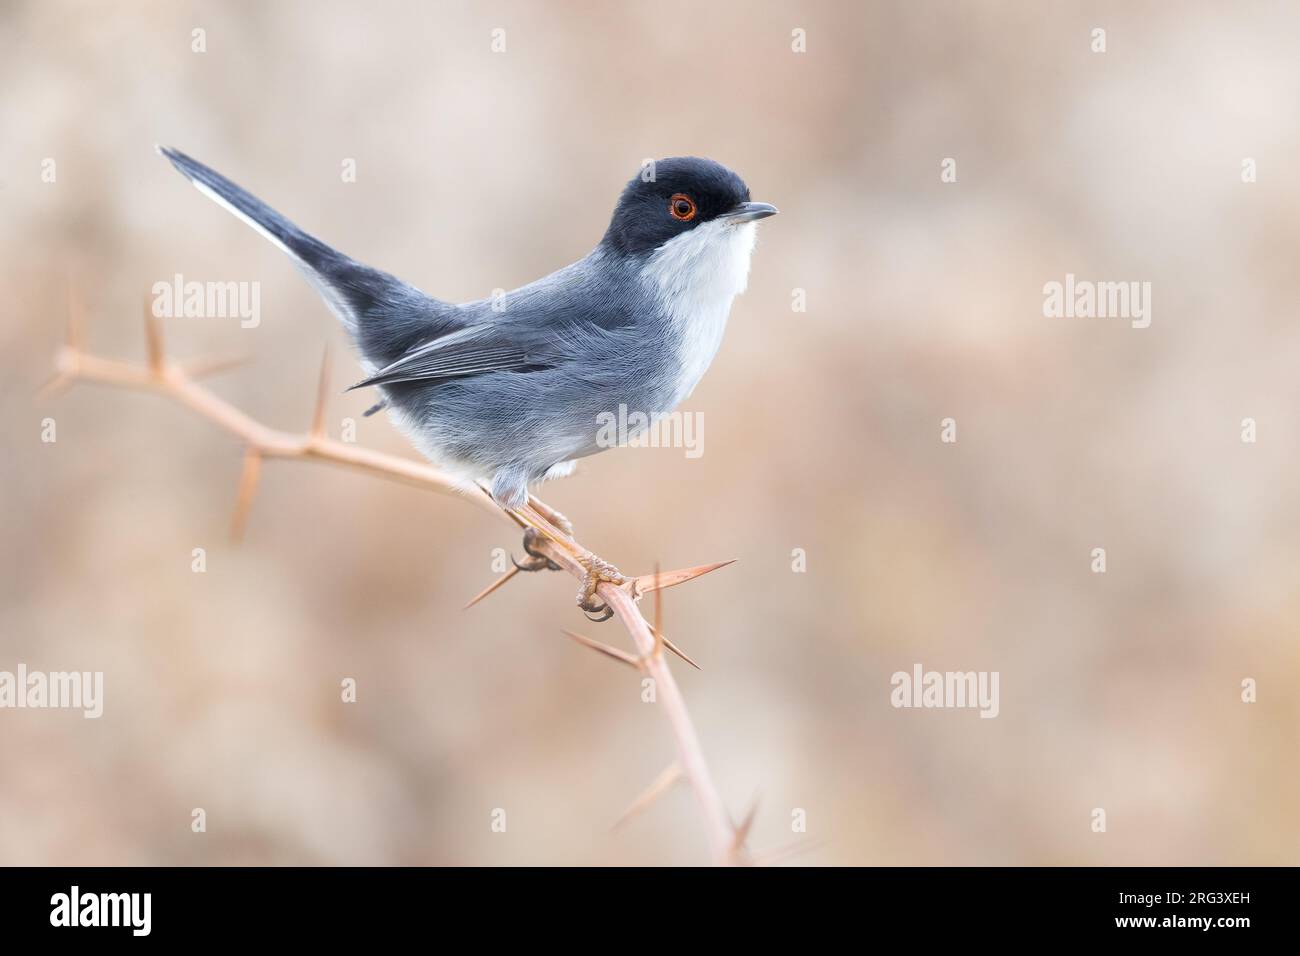 Male Sardinian Warbler, Sylvia melanocephala, in Italy. Perched on a twig. Stock Photo